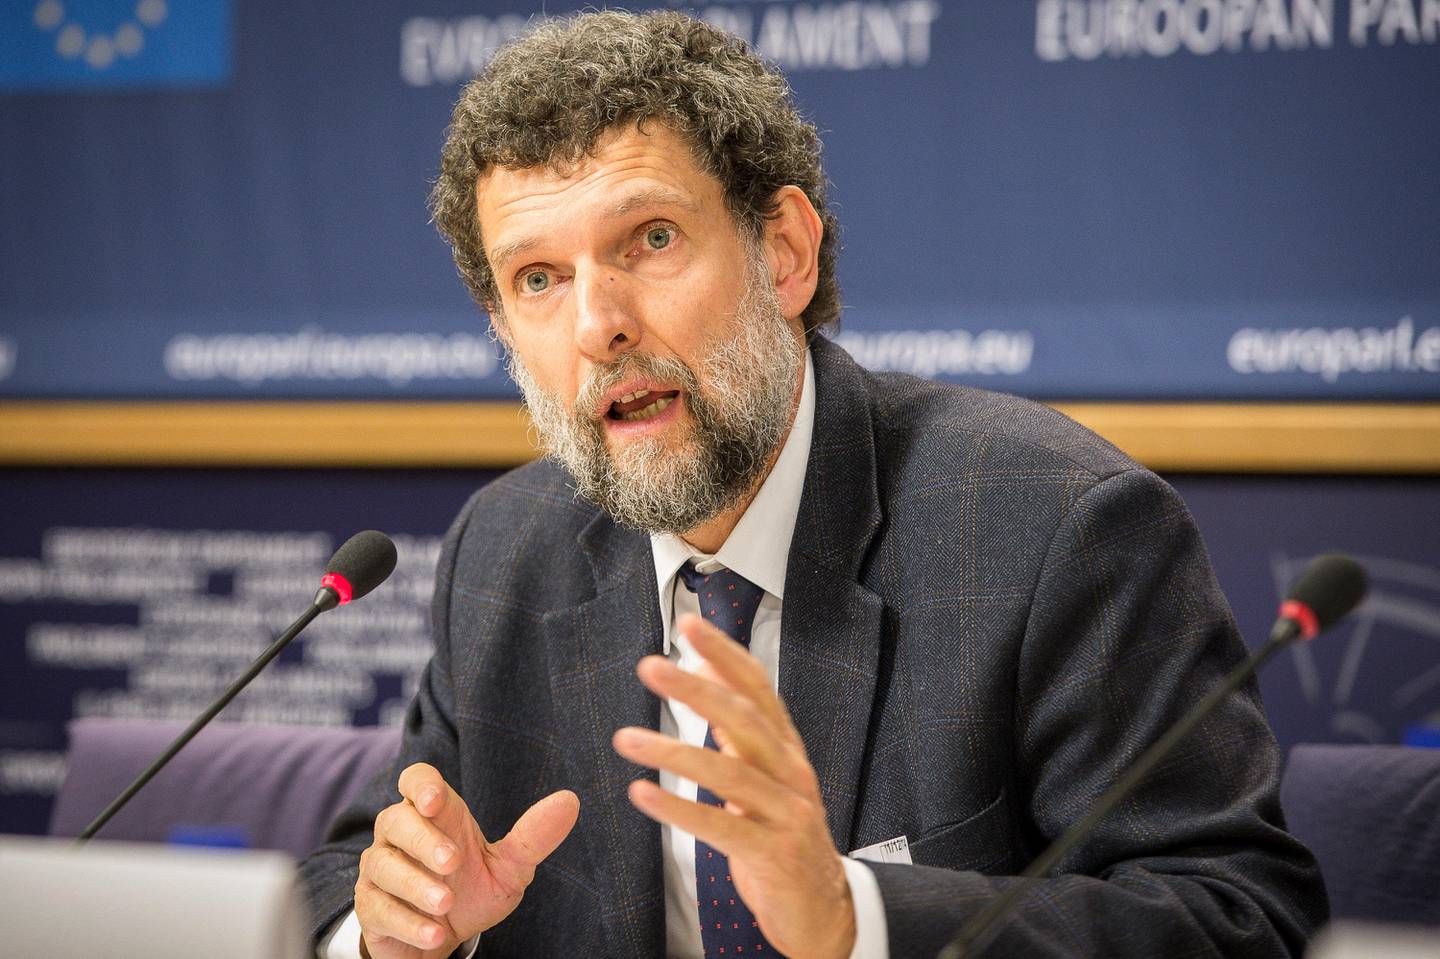 ECBXBH Brussels, Belgium. 11th December, 2014. Osman Kavala, Chair of the cultural organisation Anadolu Kultur in Turkey holds press conference at European Parliament headquarters in Brussels, Belgium on 11.12.2014 International Peace and Reconciliation Initiative issued the Report on Turkey-Kurds Peace Process. Credit:  ZUMA Press, Inc./Alamy Live News